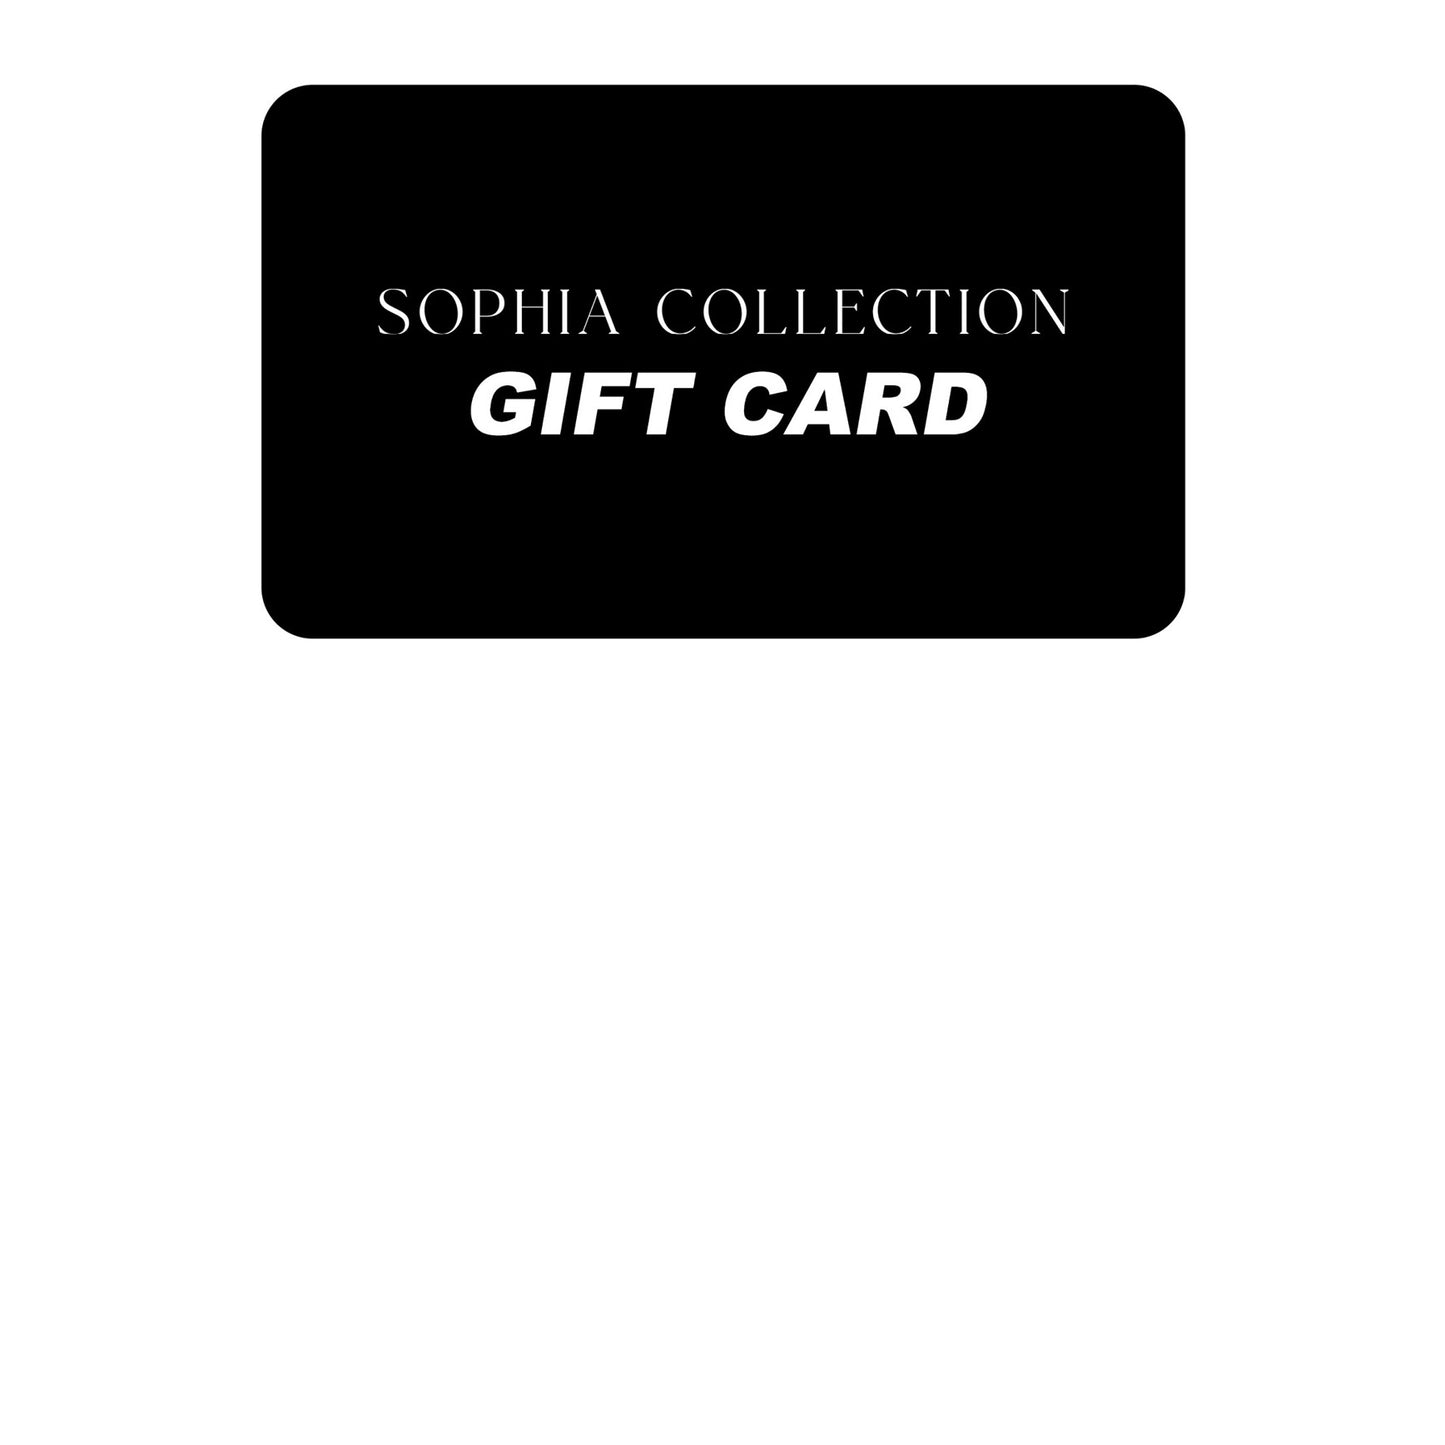 Sophia Collection Gift Card